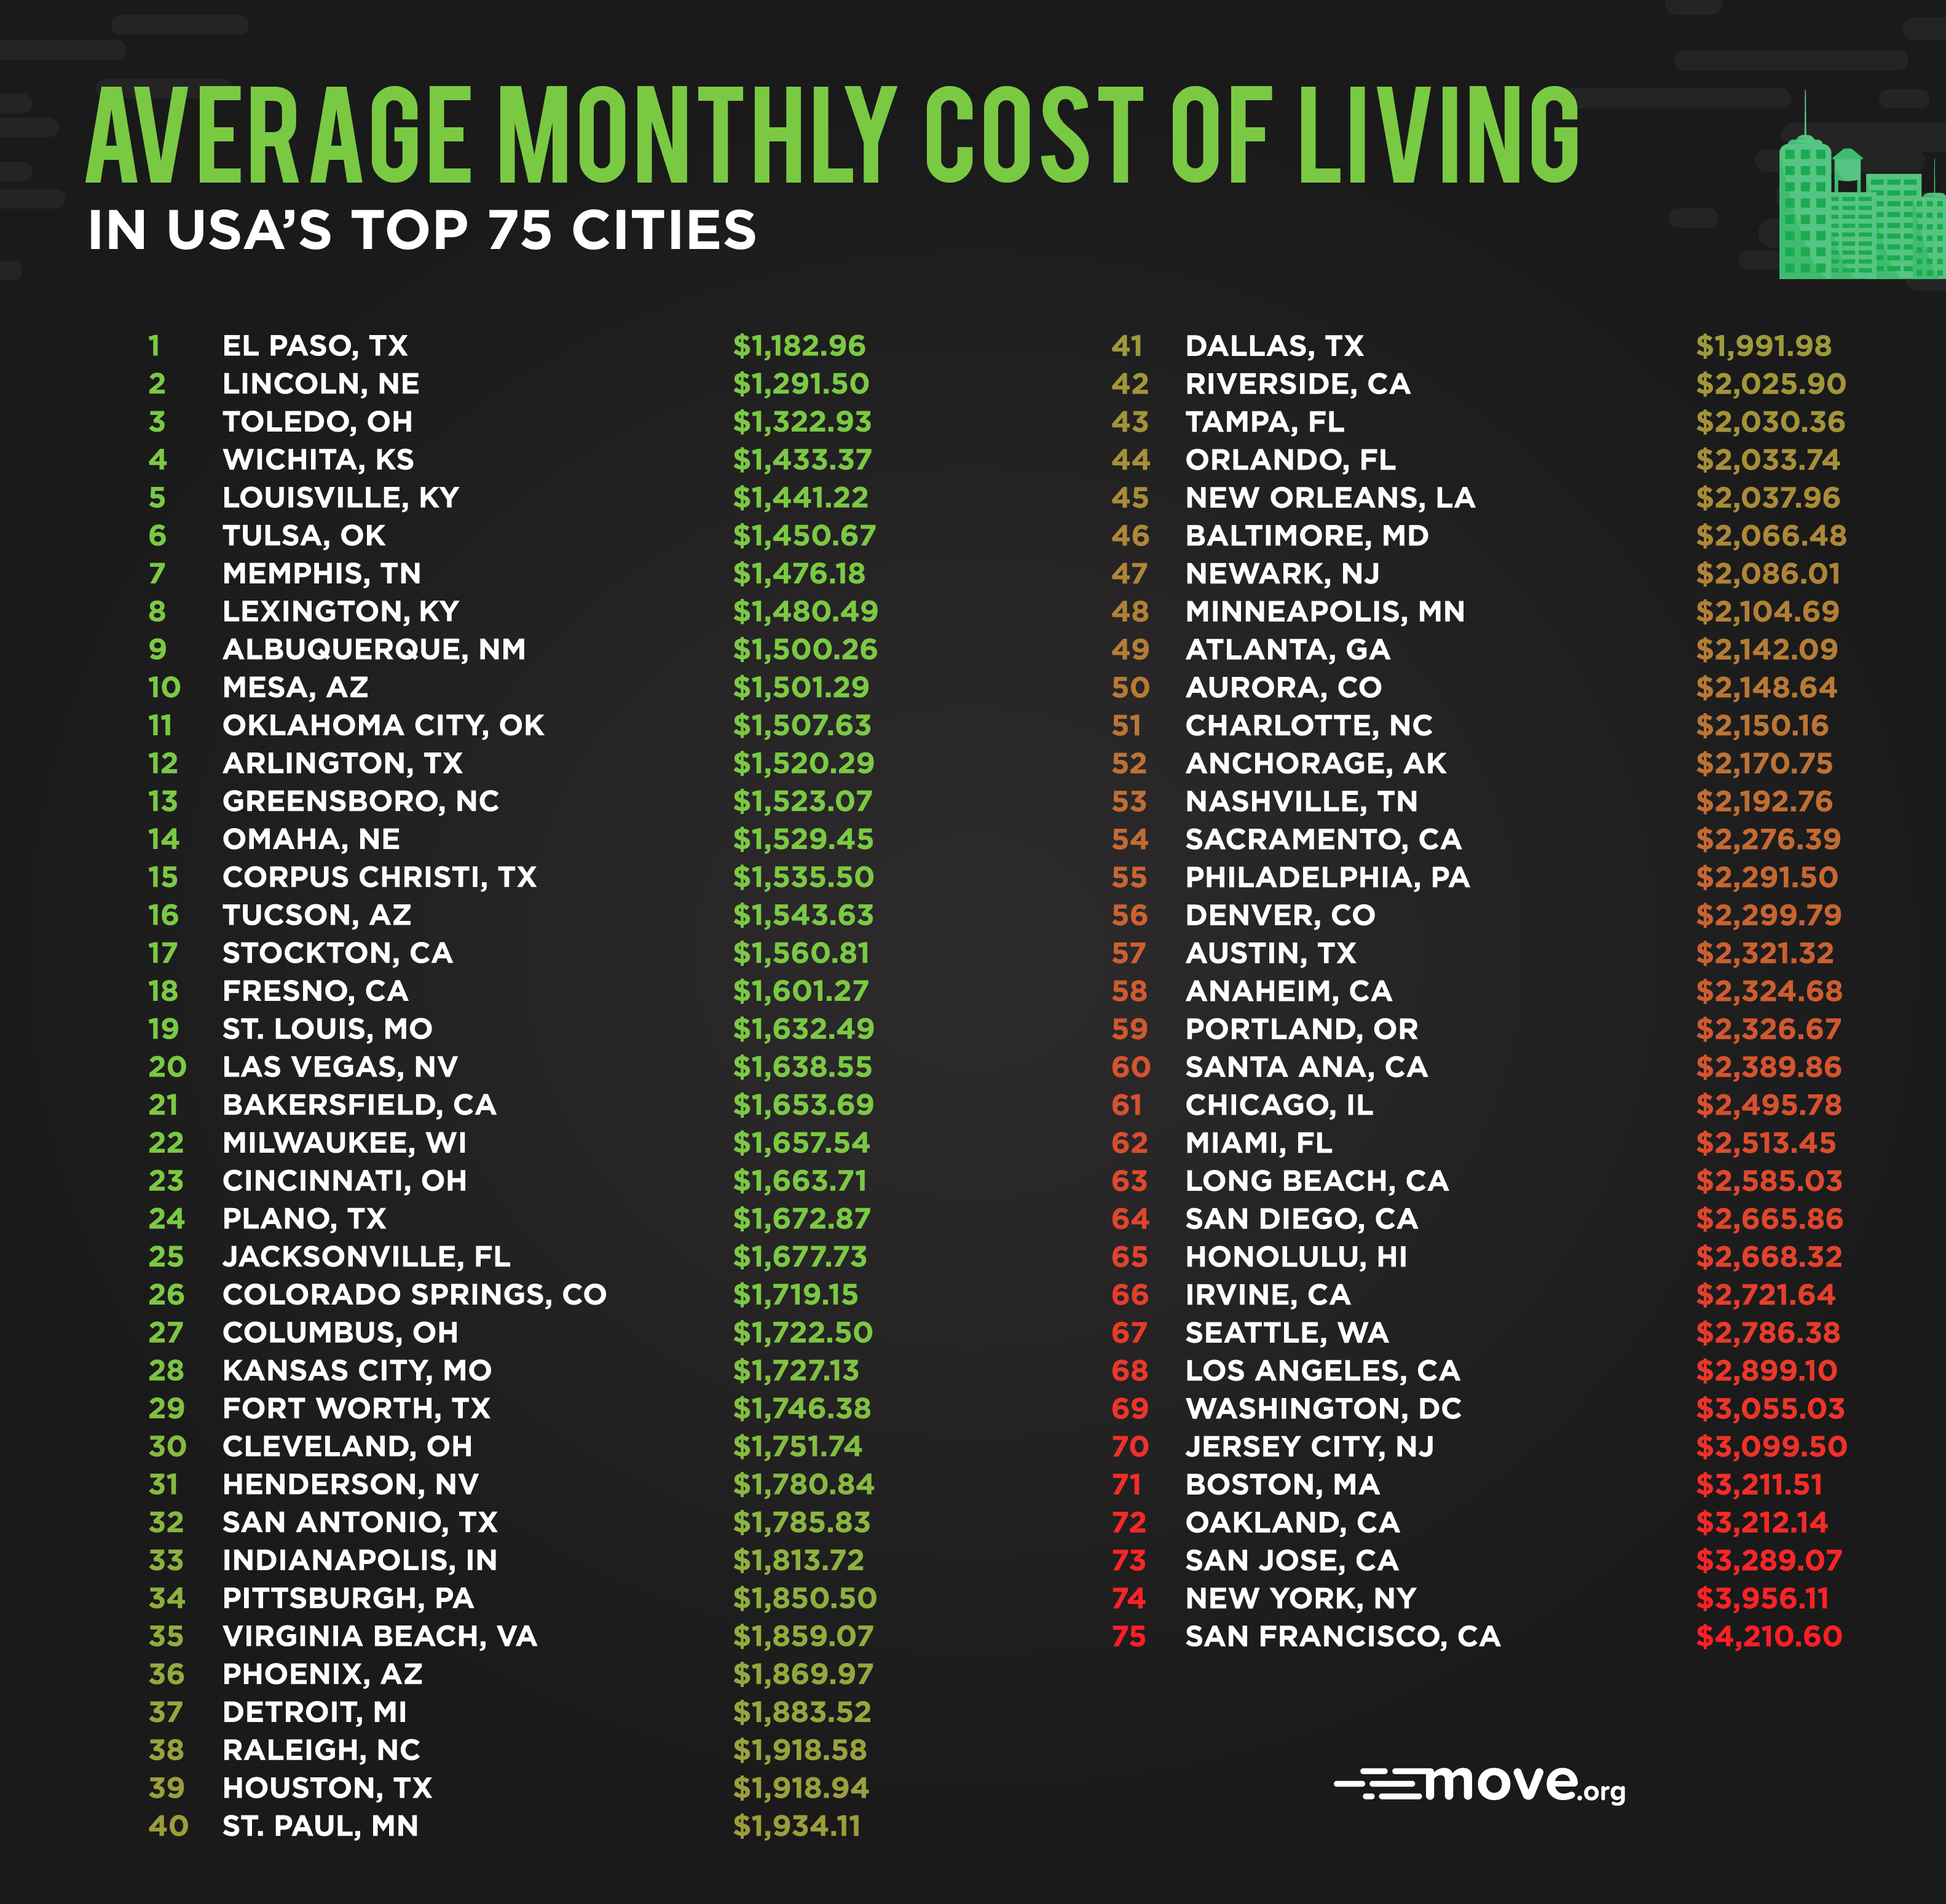 Top 10 US Cities With the Lowest Cost of Living